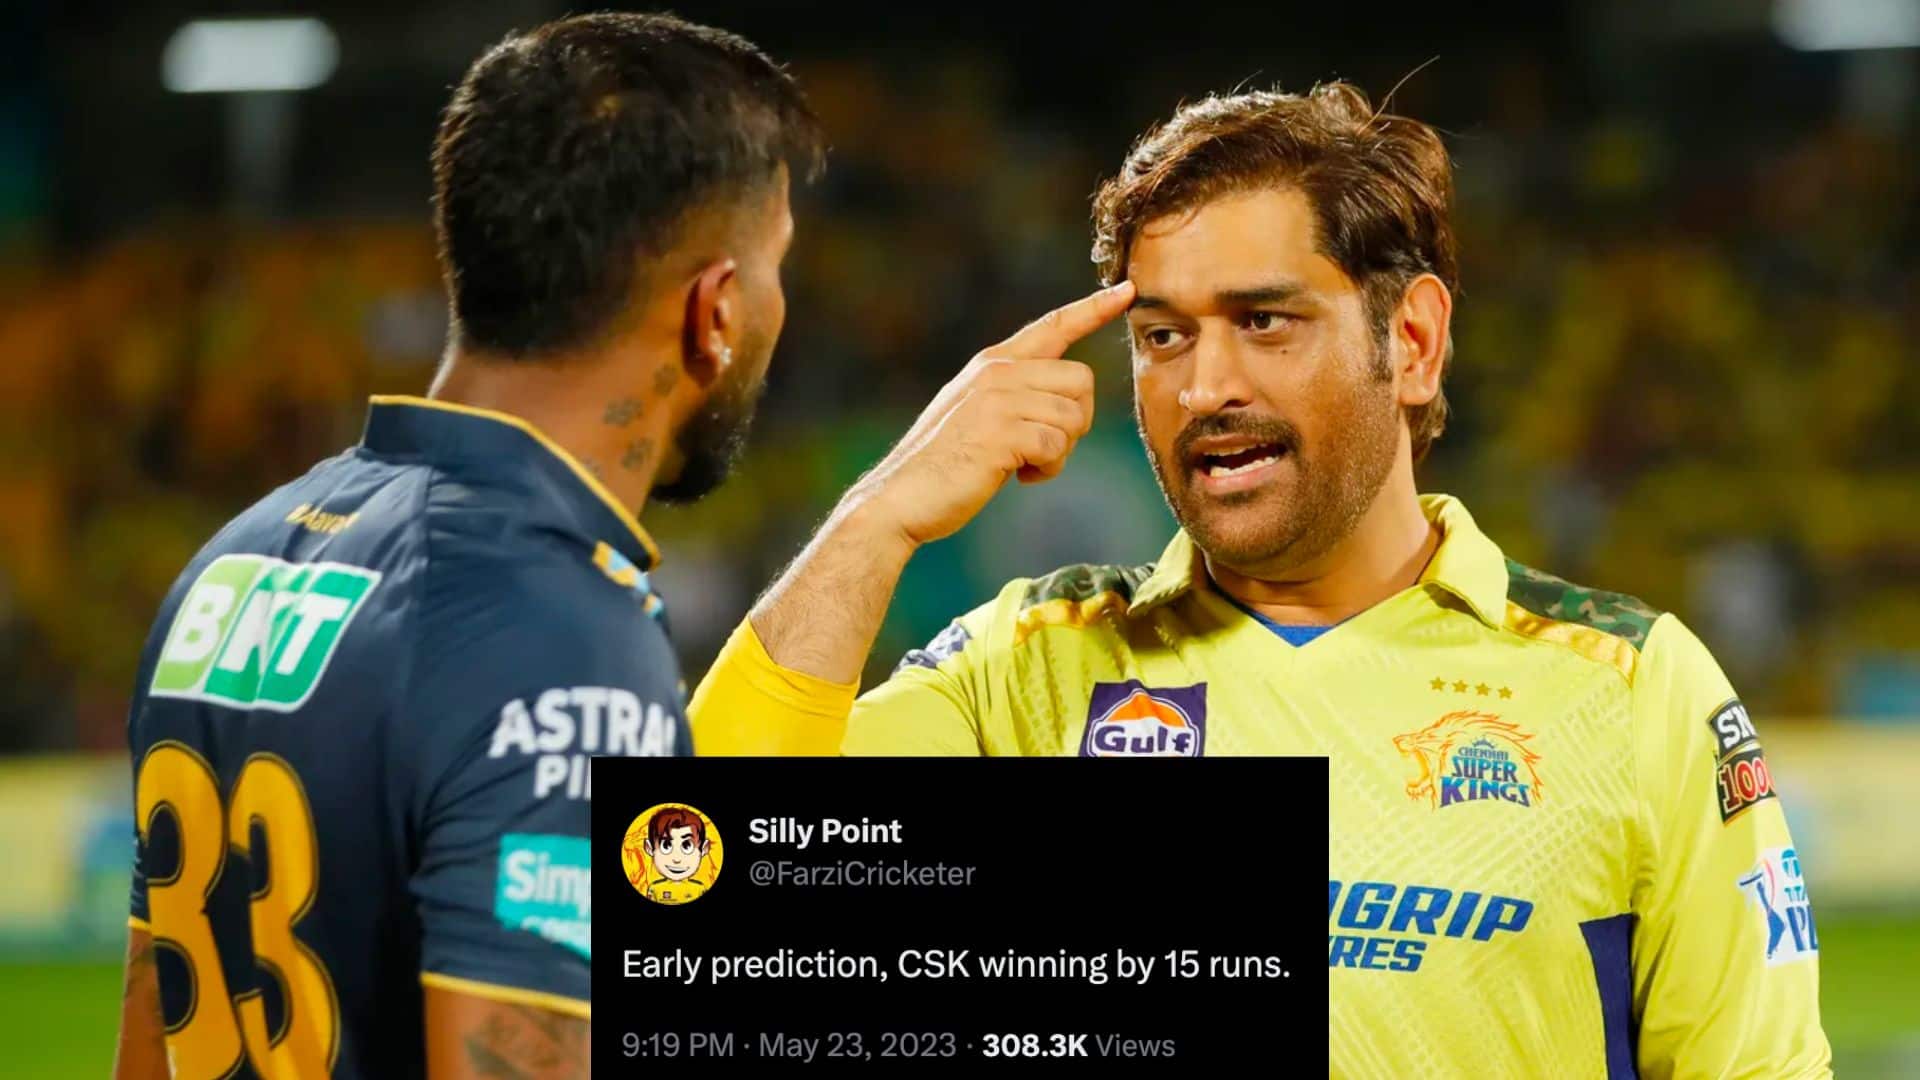 Tweet Goes Viral As Fan Predicts CSK vs GT's Result Before Start of Chase